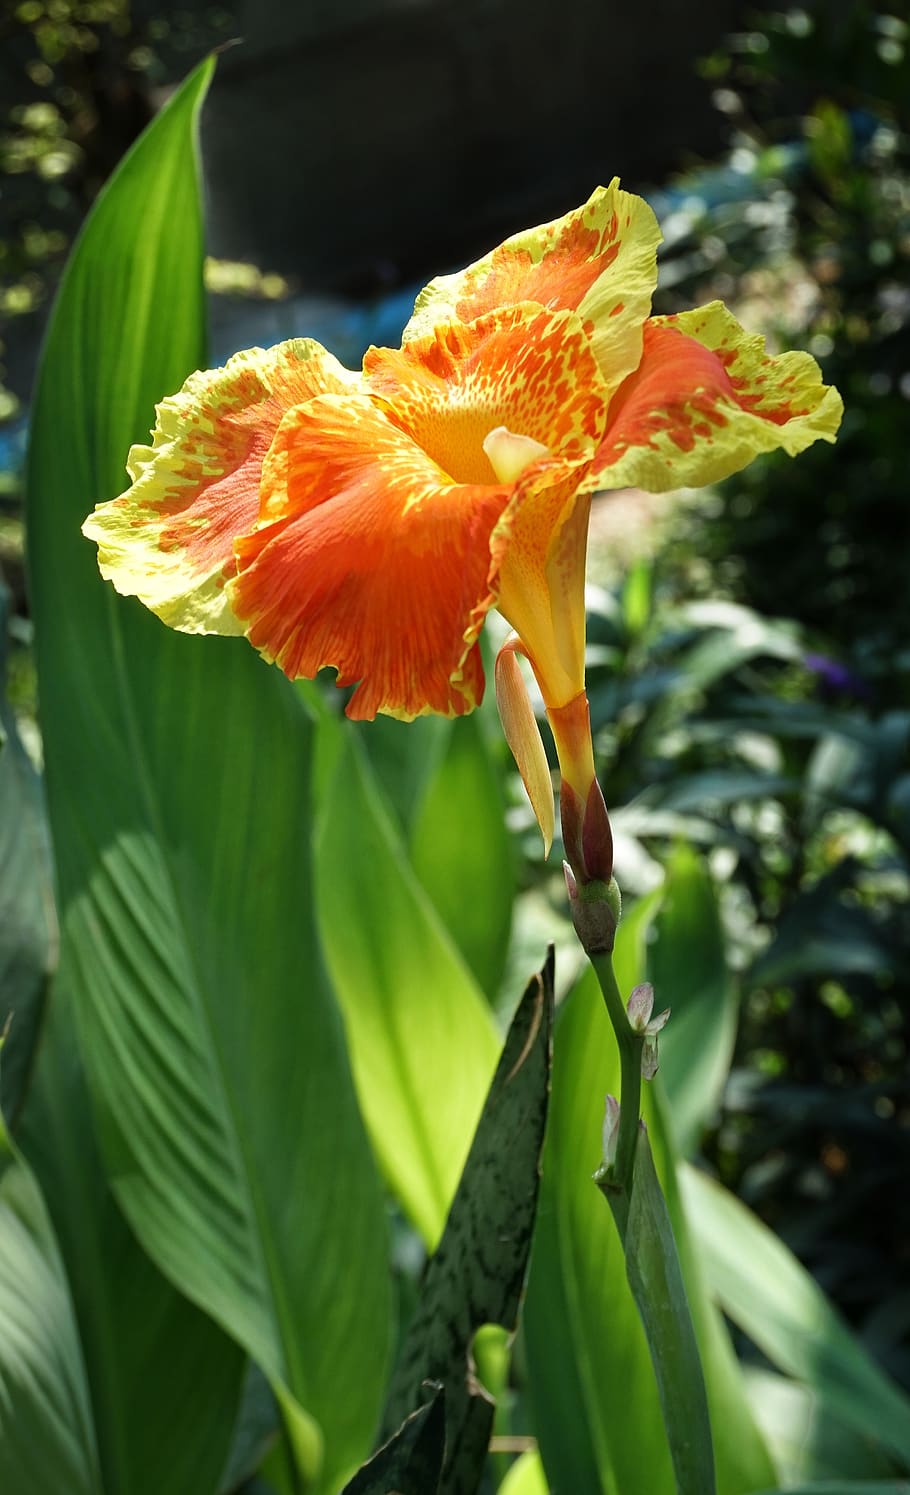 canna lily, lily, orange, red, nature, flower, flora, leaf, bright, summer